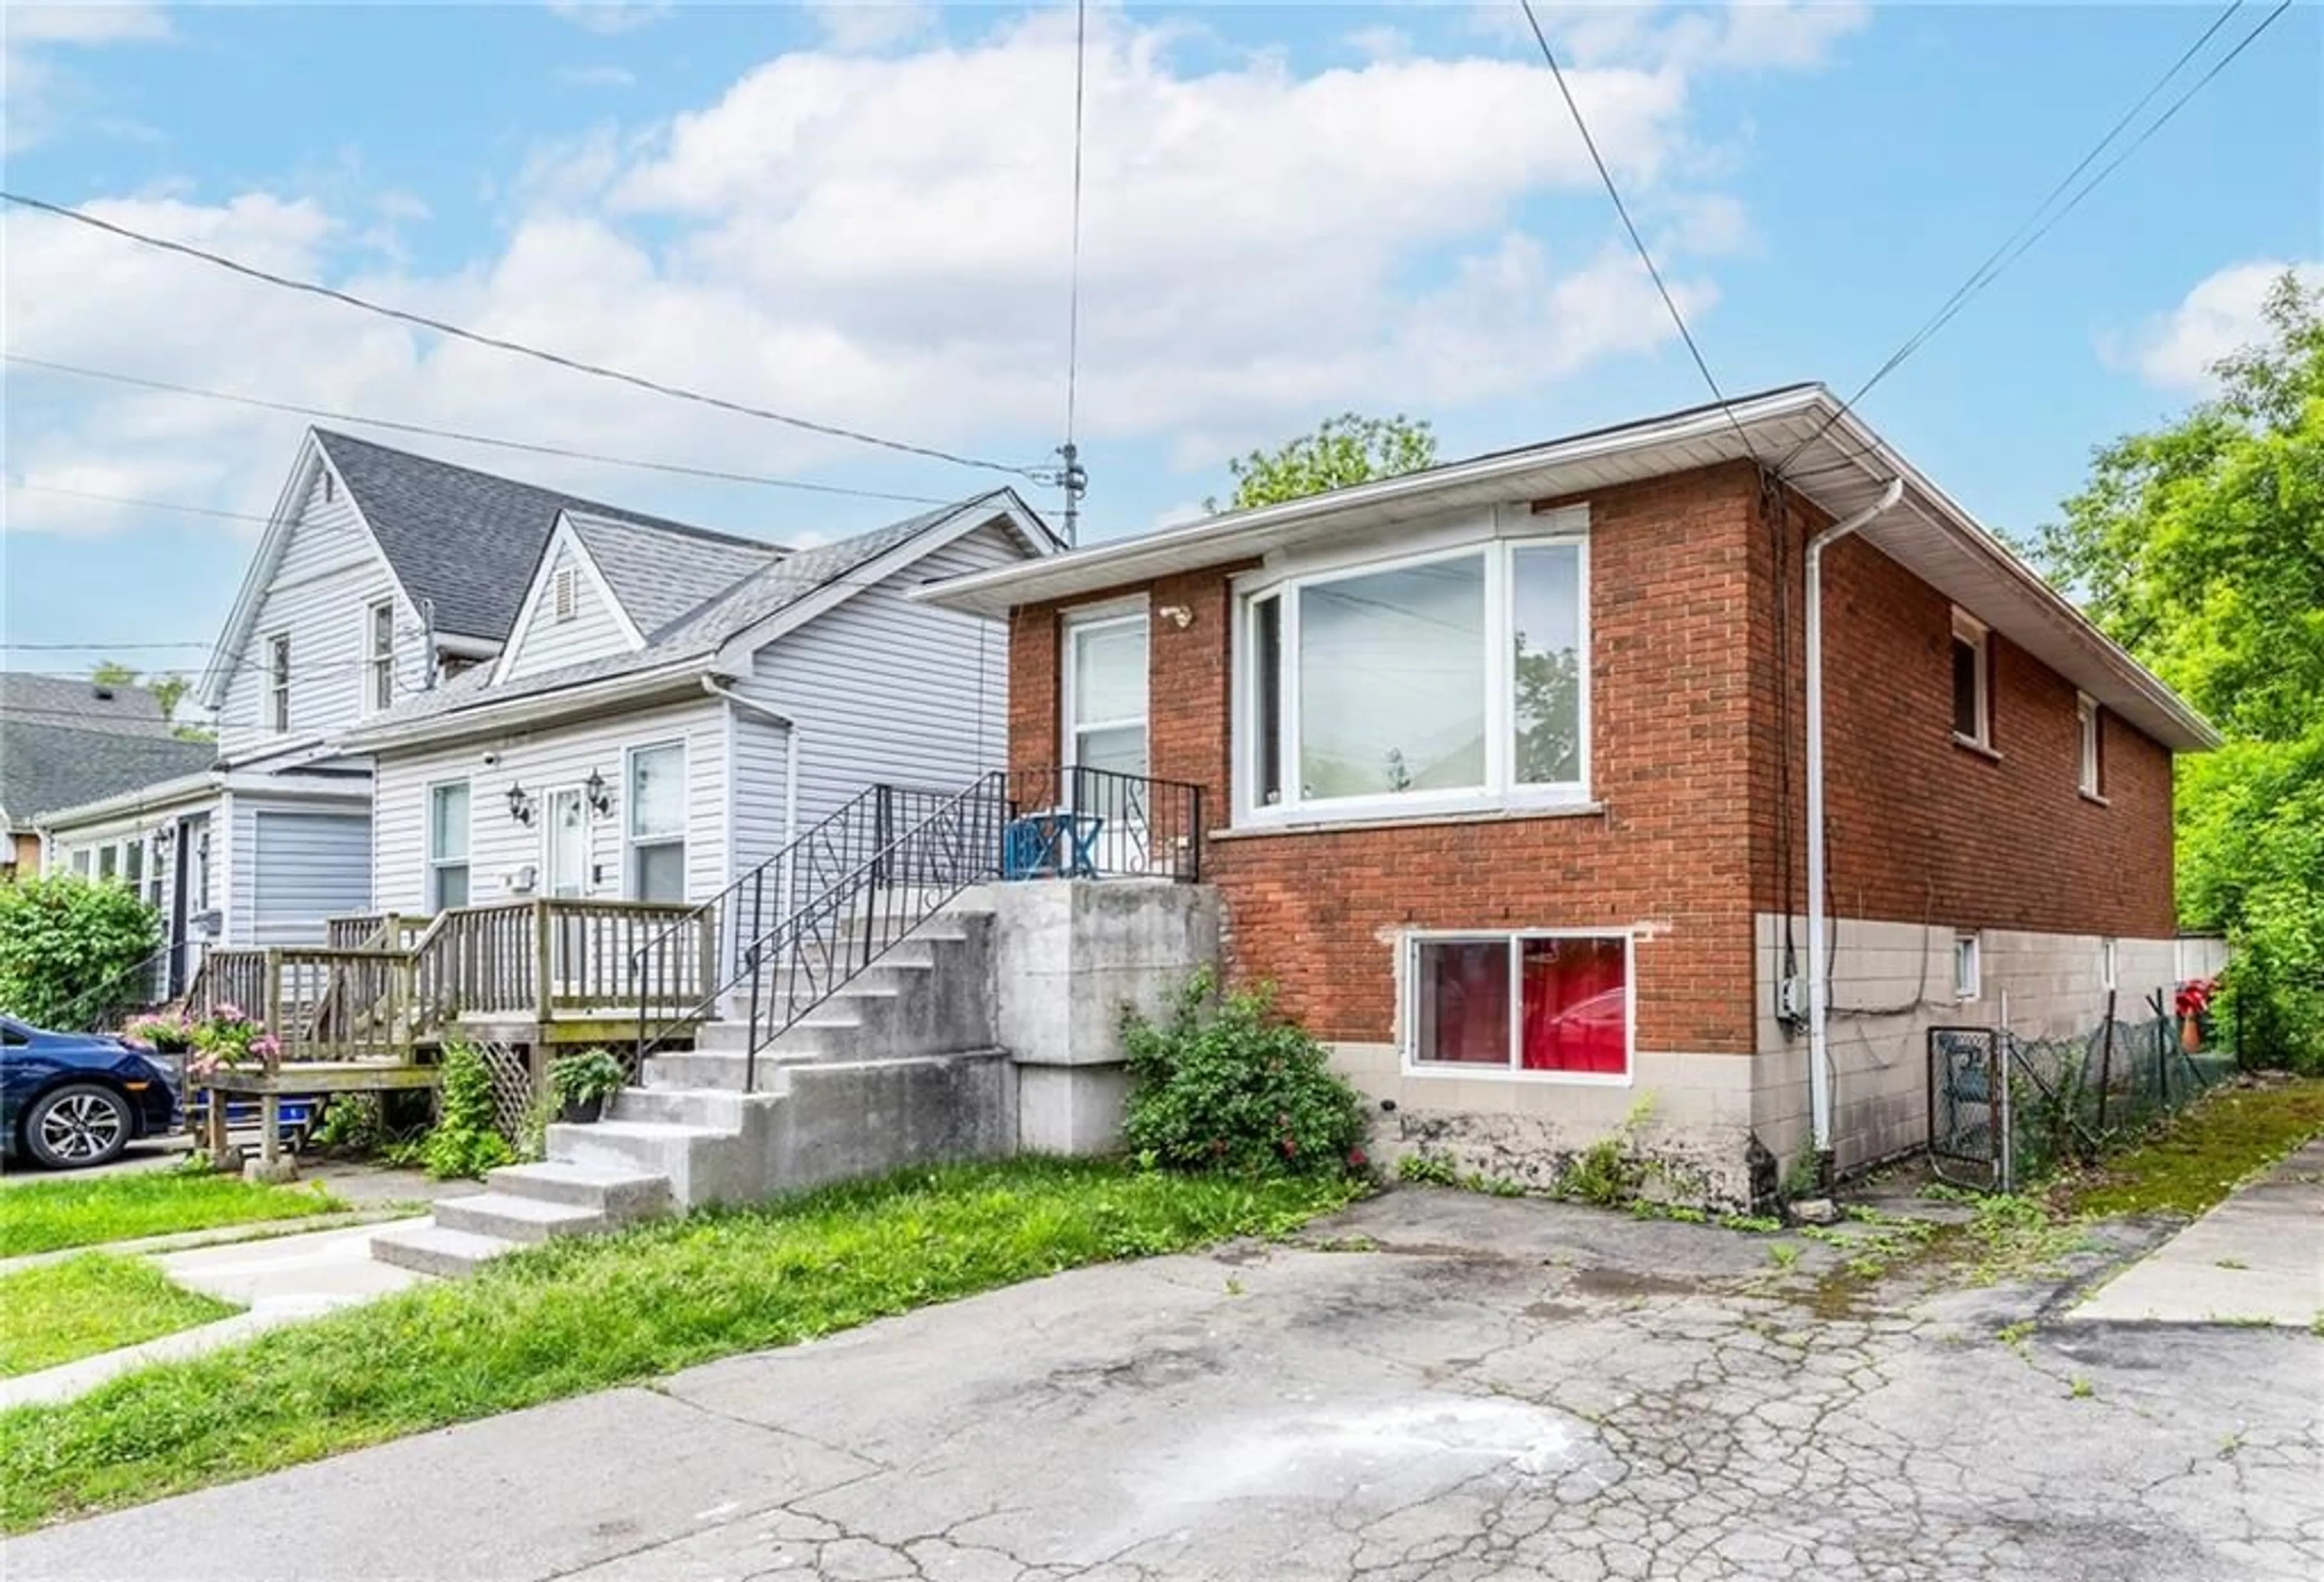 Frontside or backside of a home for 28 EAST 23Rrd St, Hamilton Ontario L8V 2W6